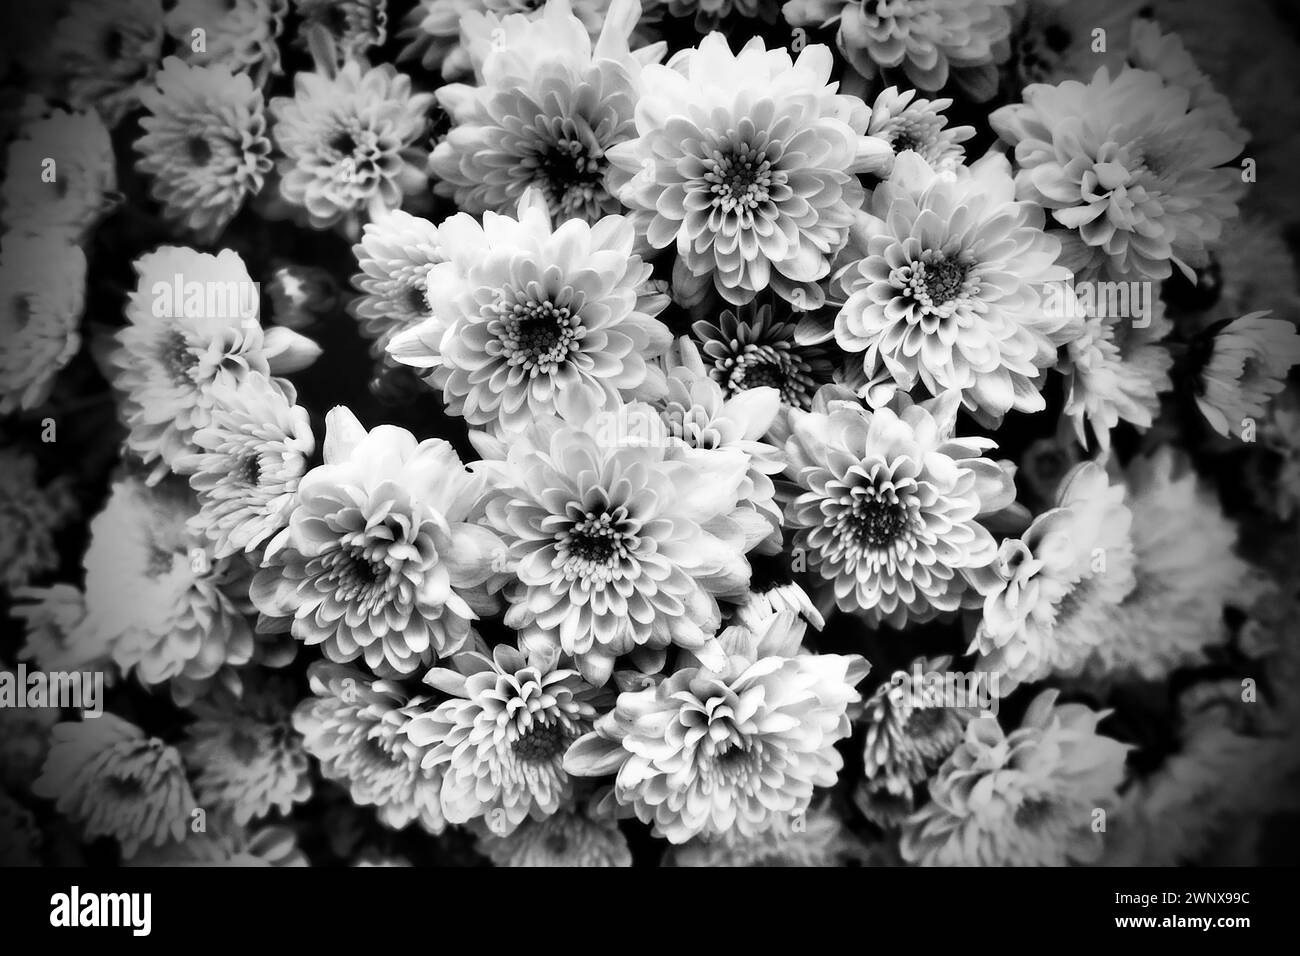 Chrysanthemums in a bouquet. Black and white monochrome photography. Dark vignetting. Postcard or card. Congratulations or expressions of regret Stock Photo